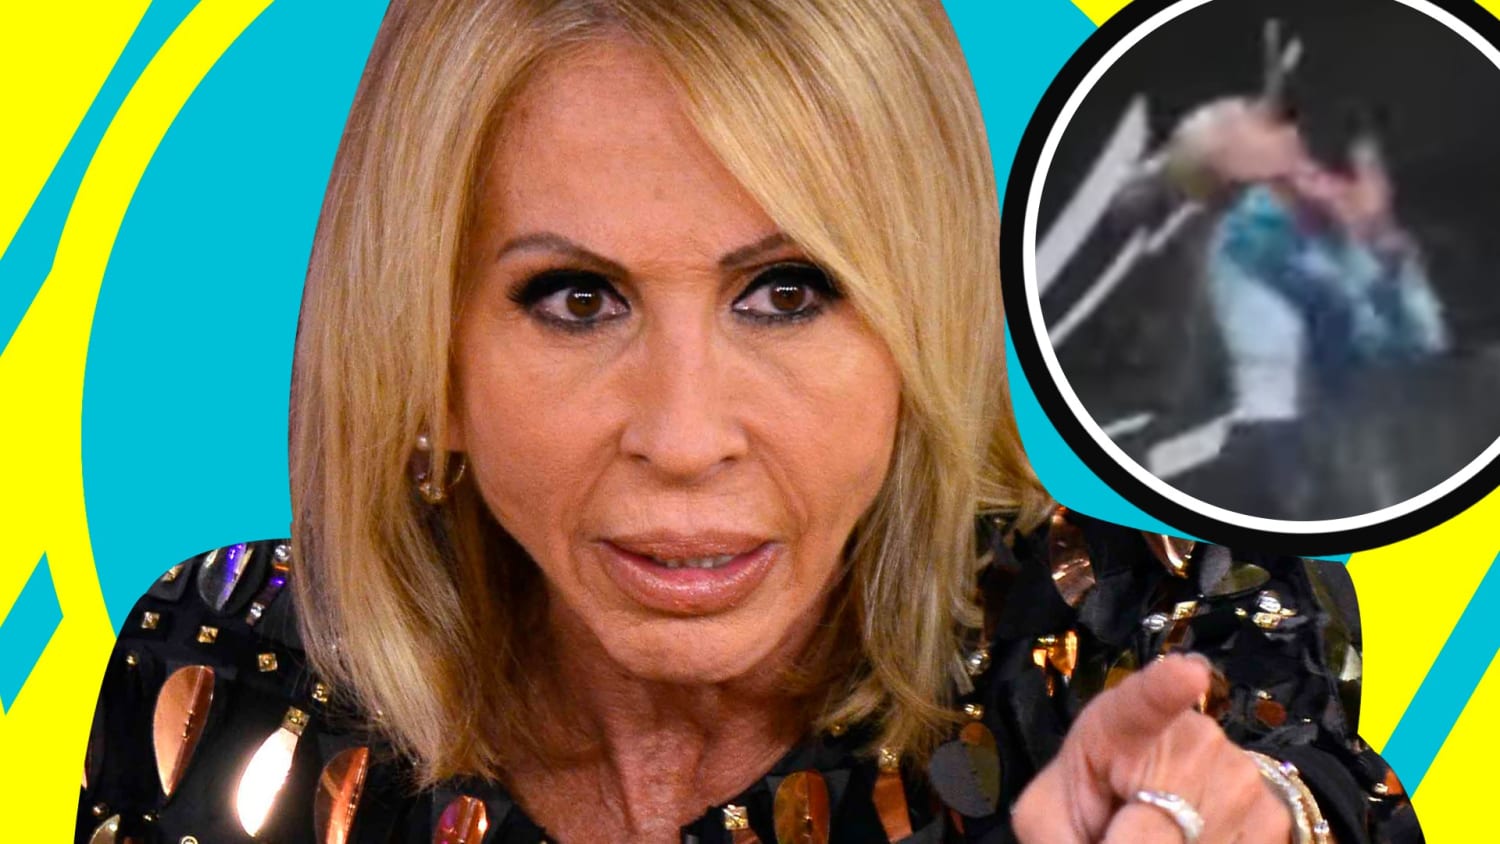 They lashed out against Laura Bozzo for showing herself to nature - Infobae